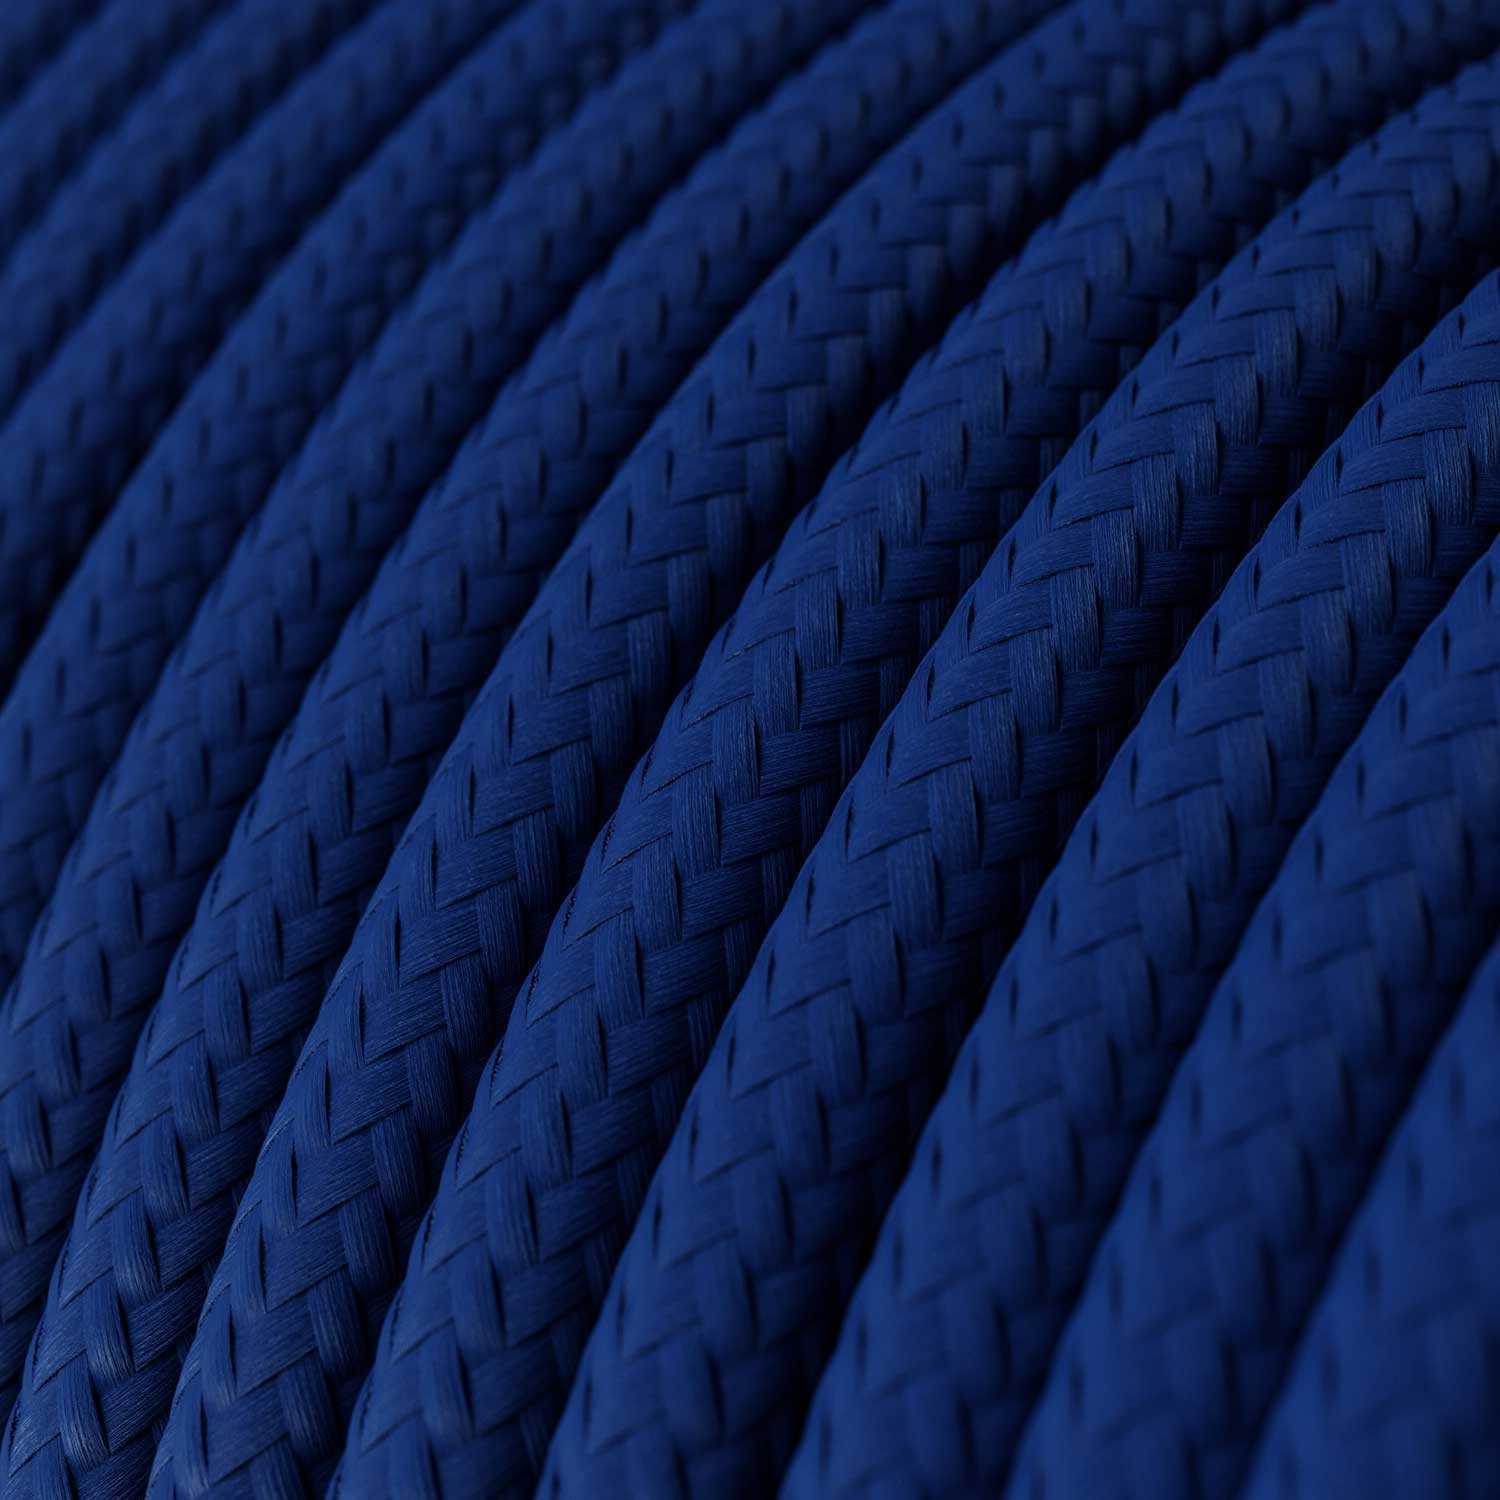 RM12 Blue Round Rayon Electrical Fabric Cloth Cord Cable